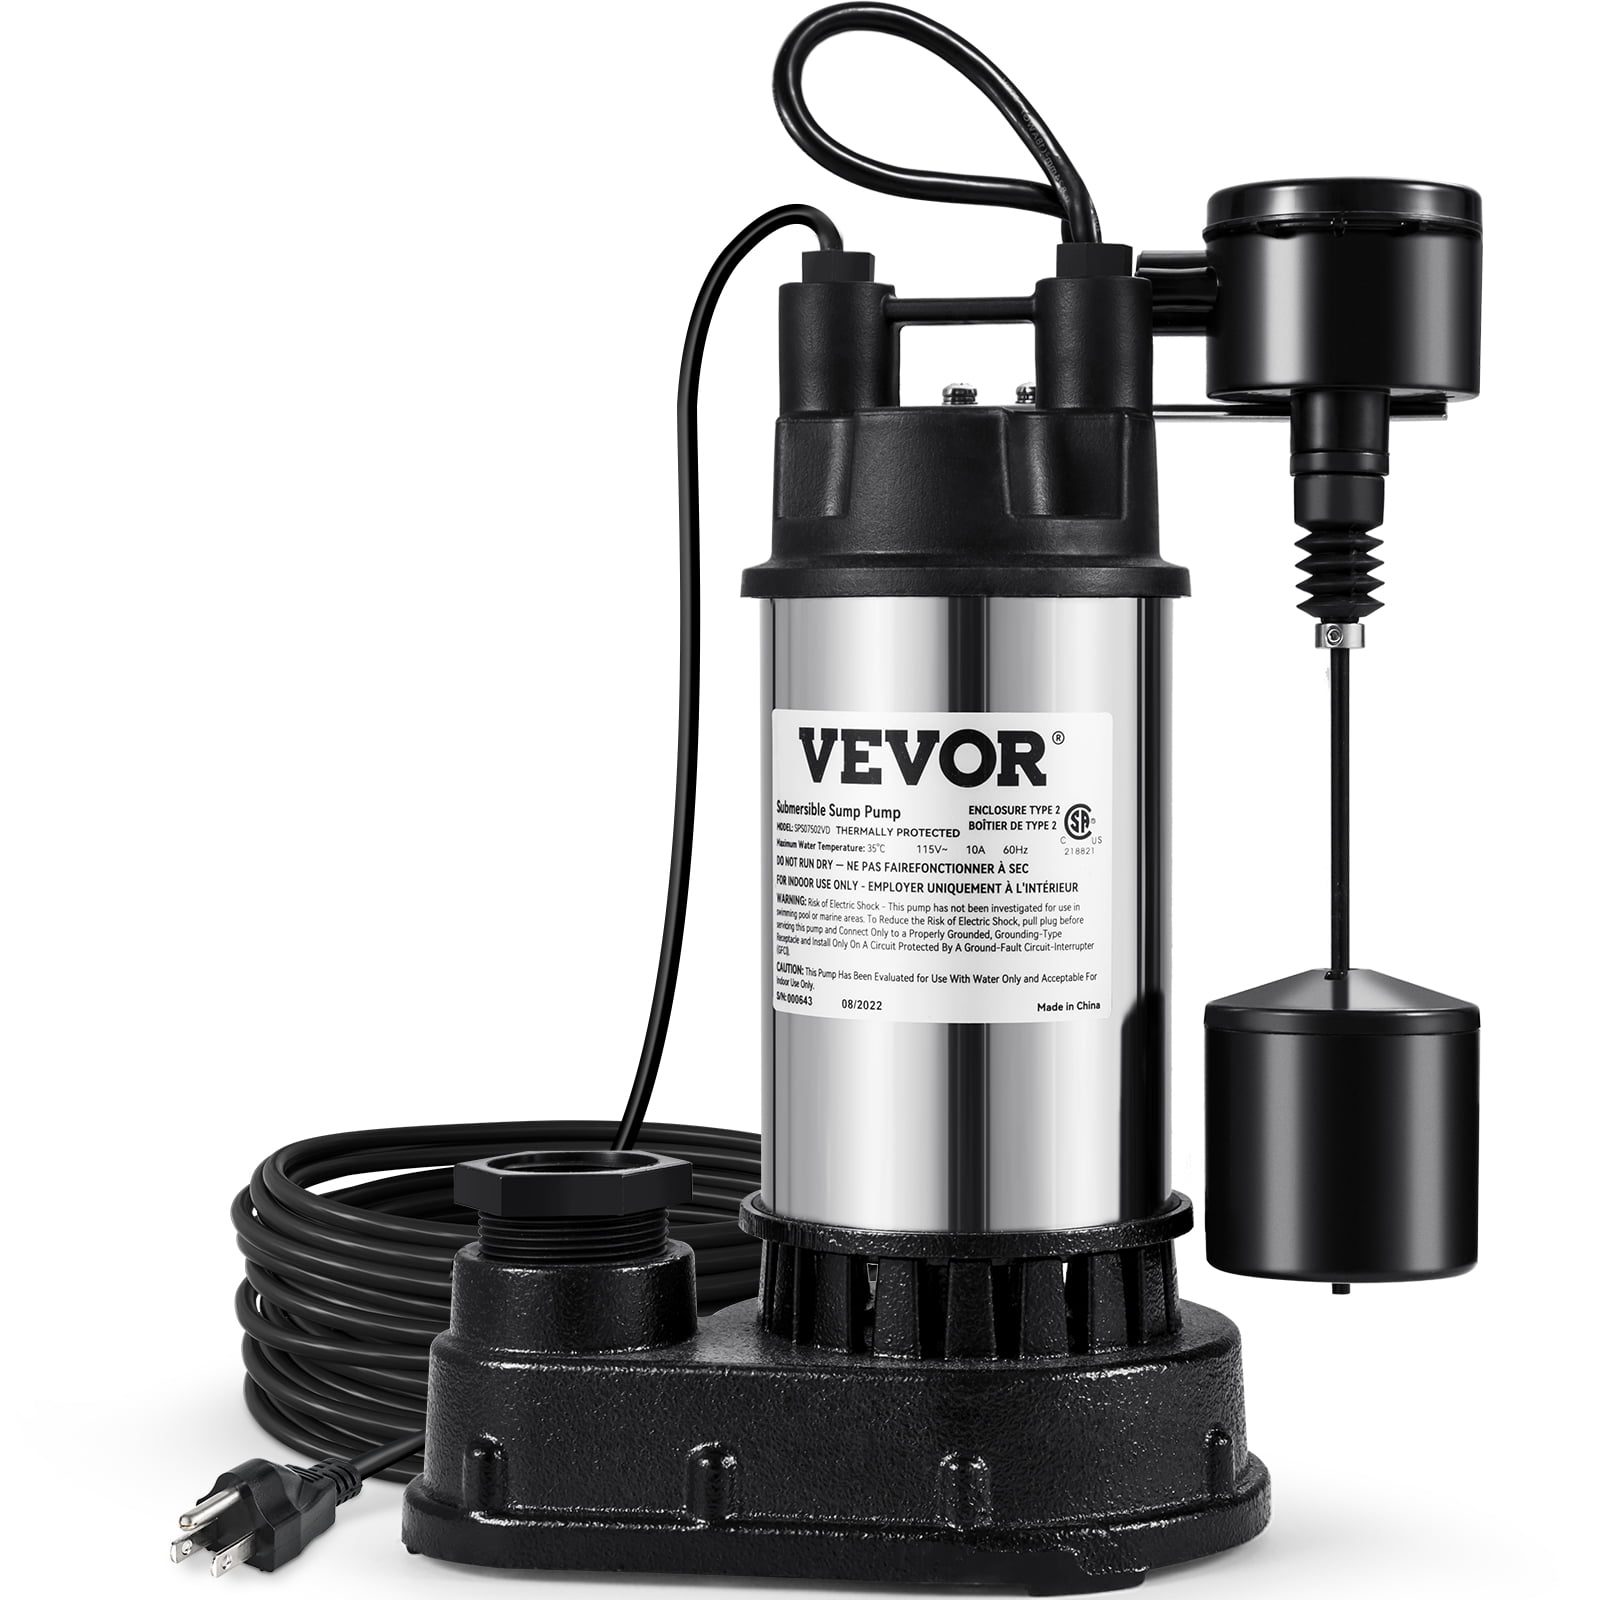 VEVOR Sump Pump, 1.5 HP 6000 GPH, Submersible Cast Iron and Stainless Steel  Water Pump, 1-1/2 Discharge With 1-1/4 Adaptor, Automatic Vertical Float